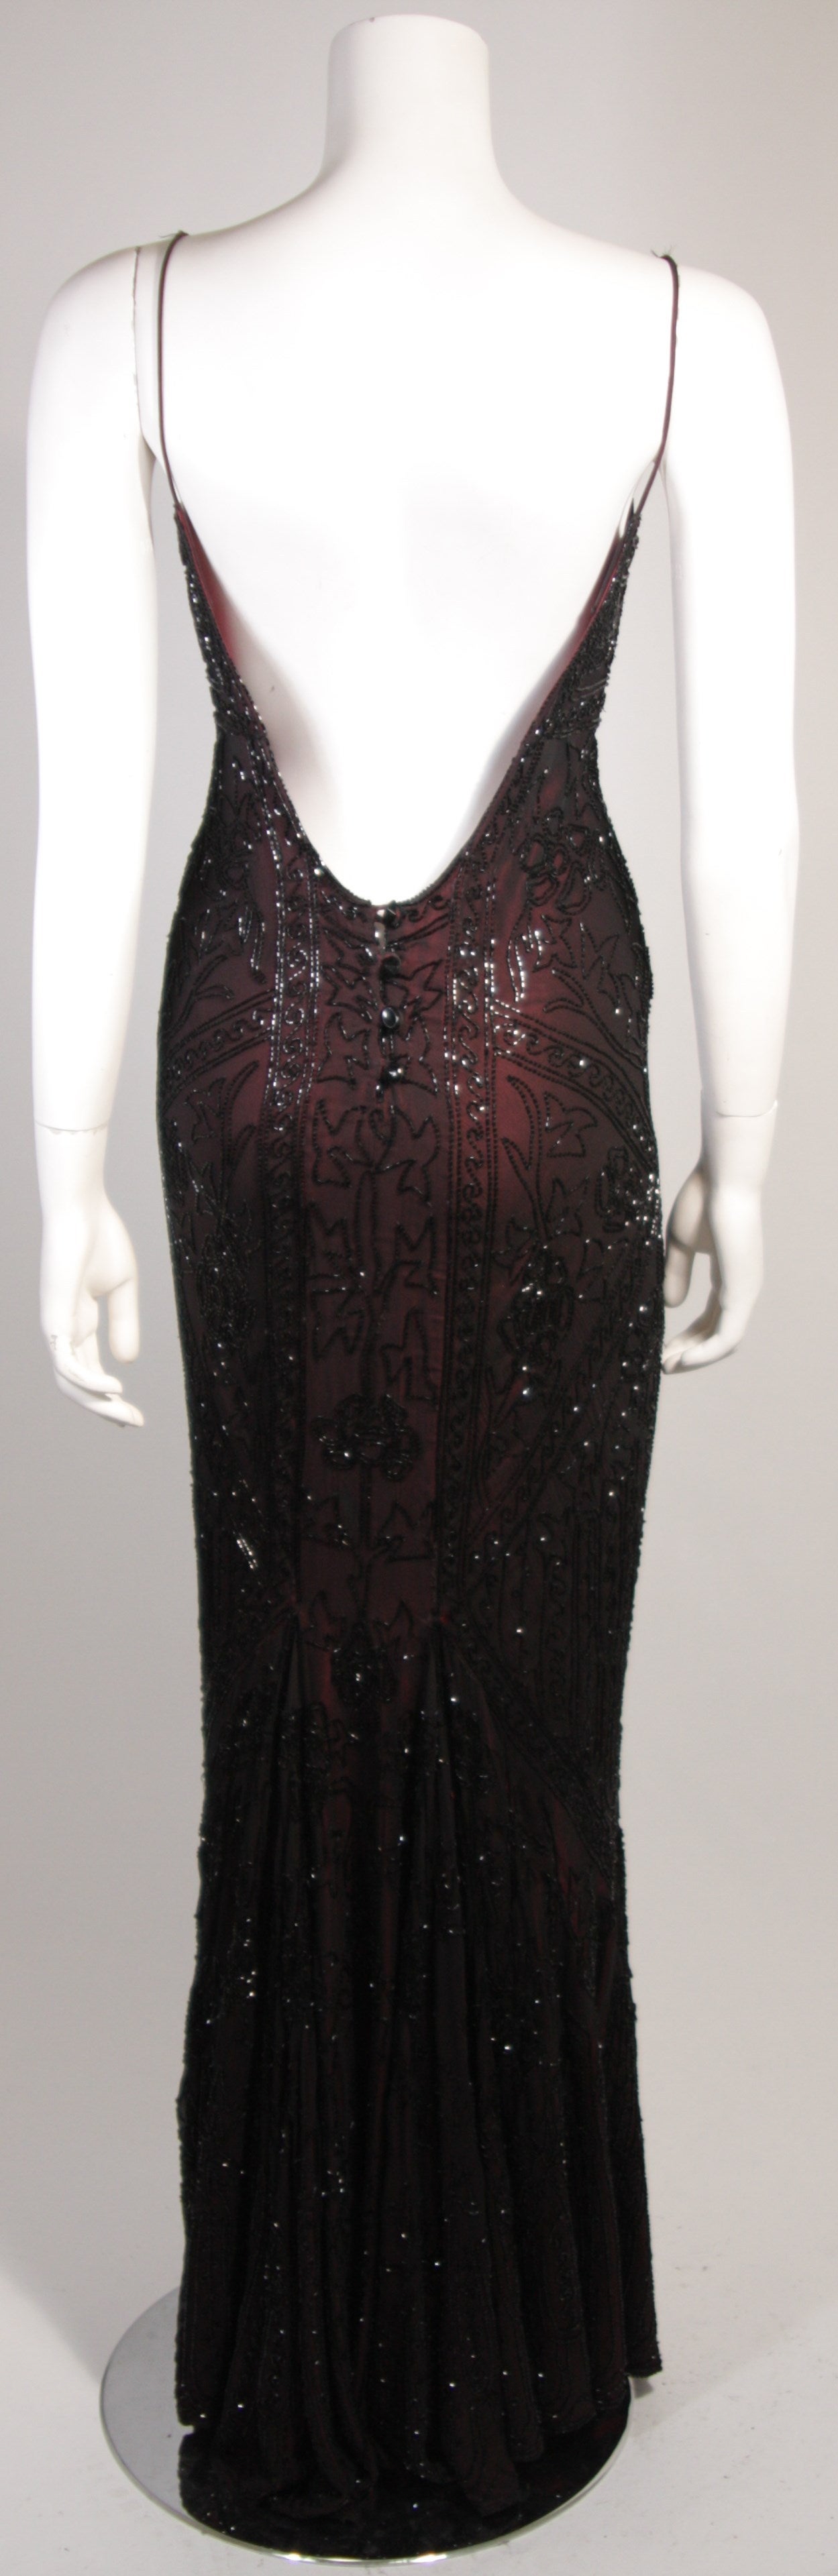 Les Habitudes Deco Inspired Burgundy Beaded Gown Size M 2